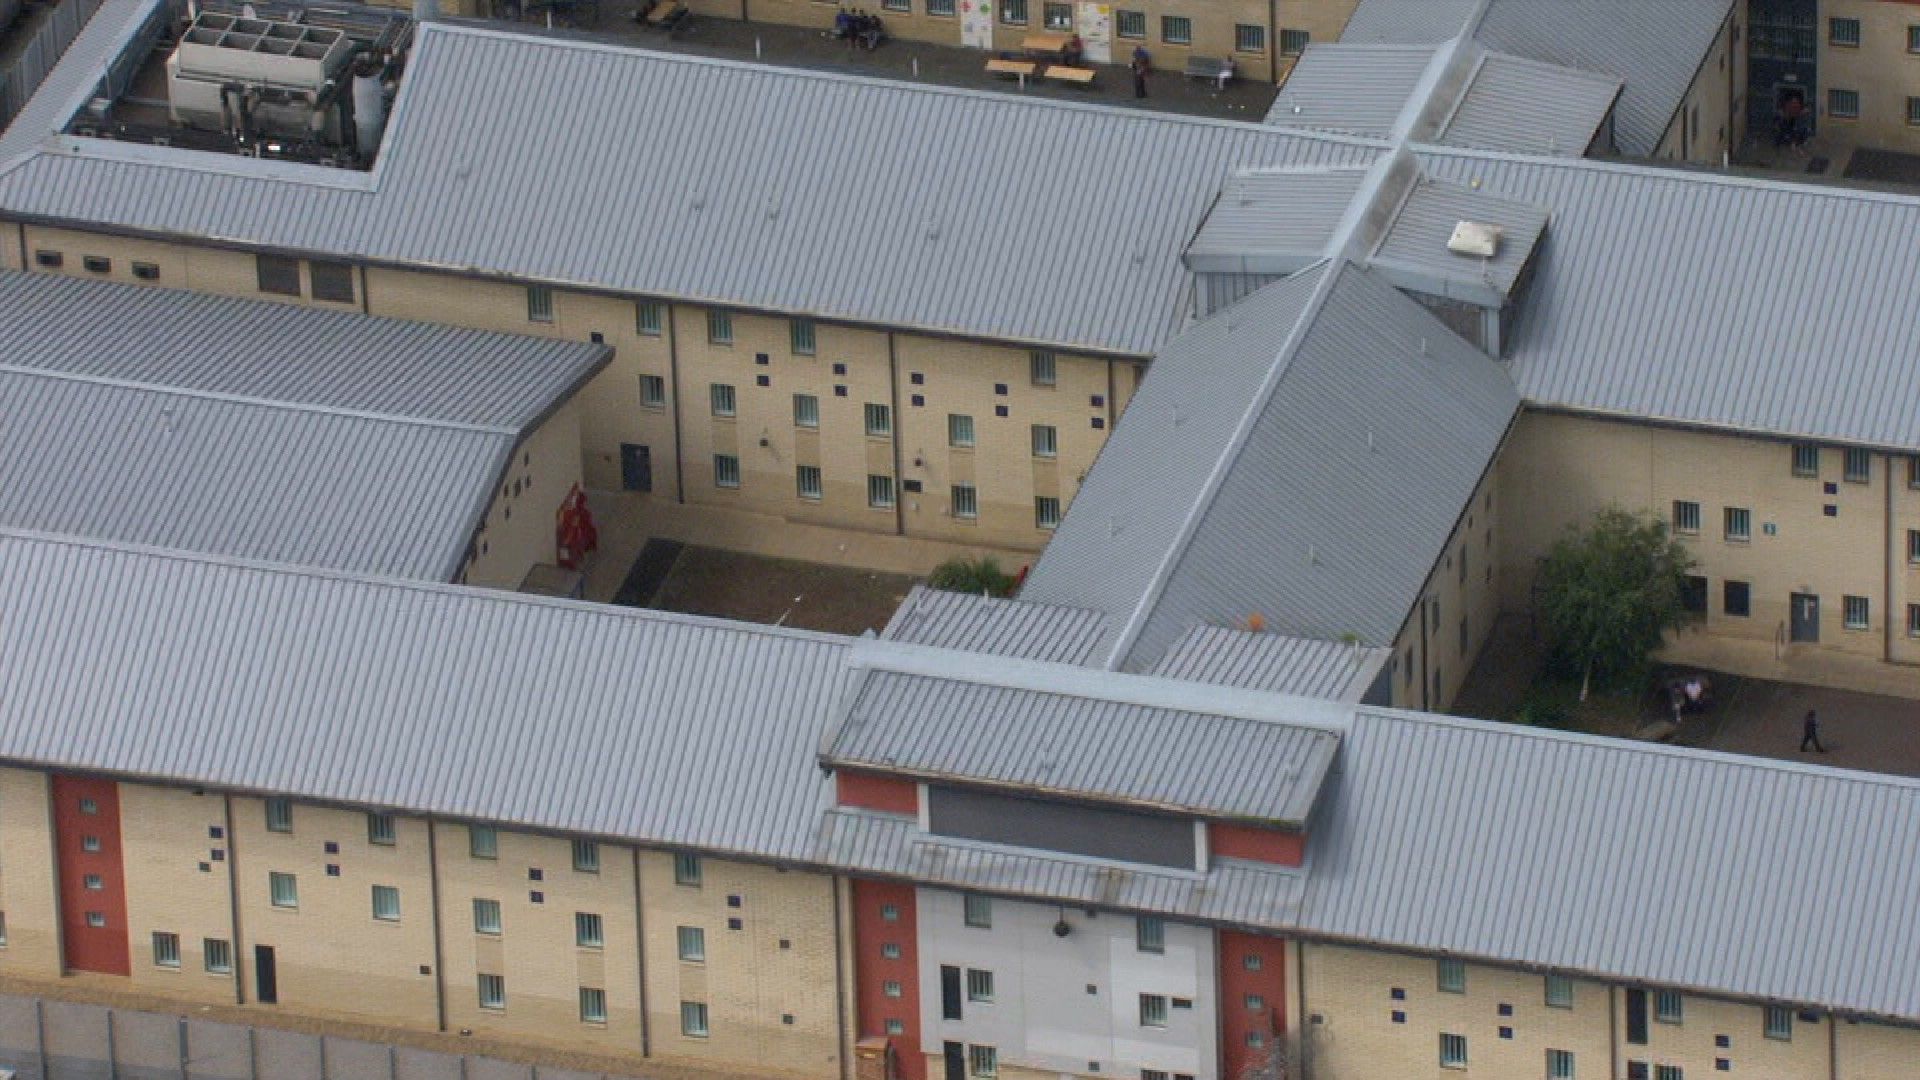 Prisons watchdog describes 'worst conditions ever seen' at immigration detention centre